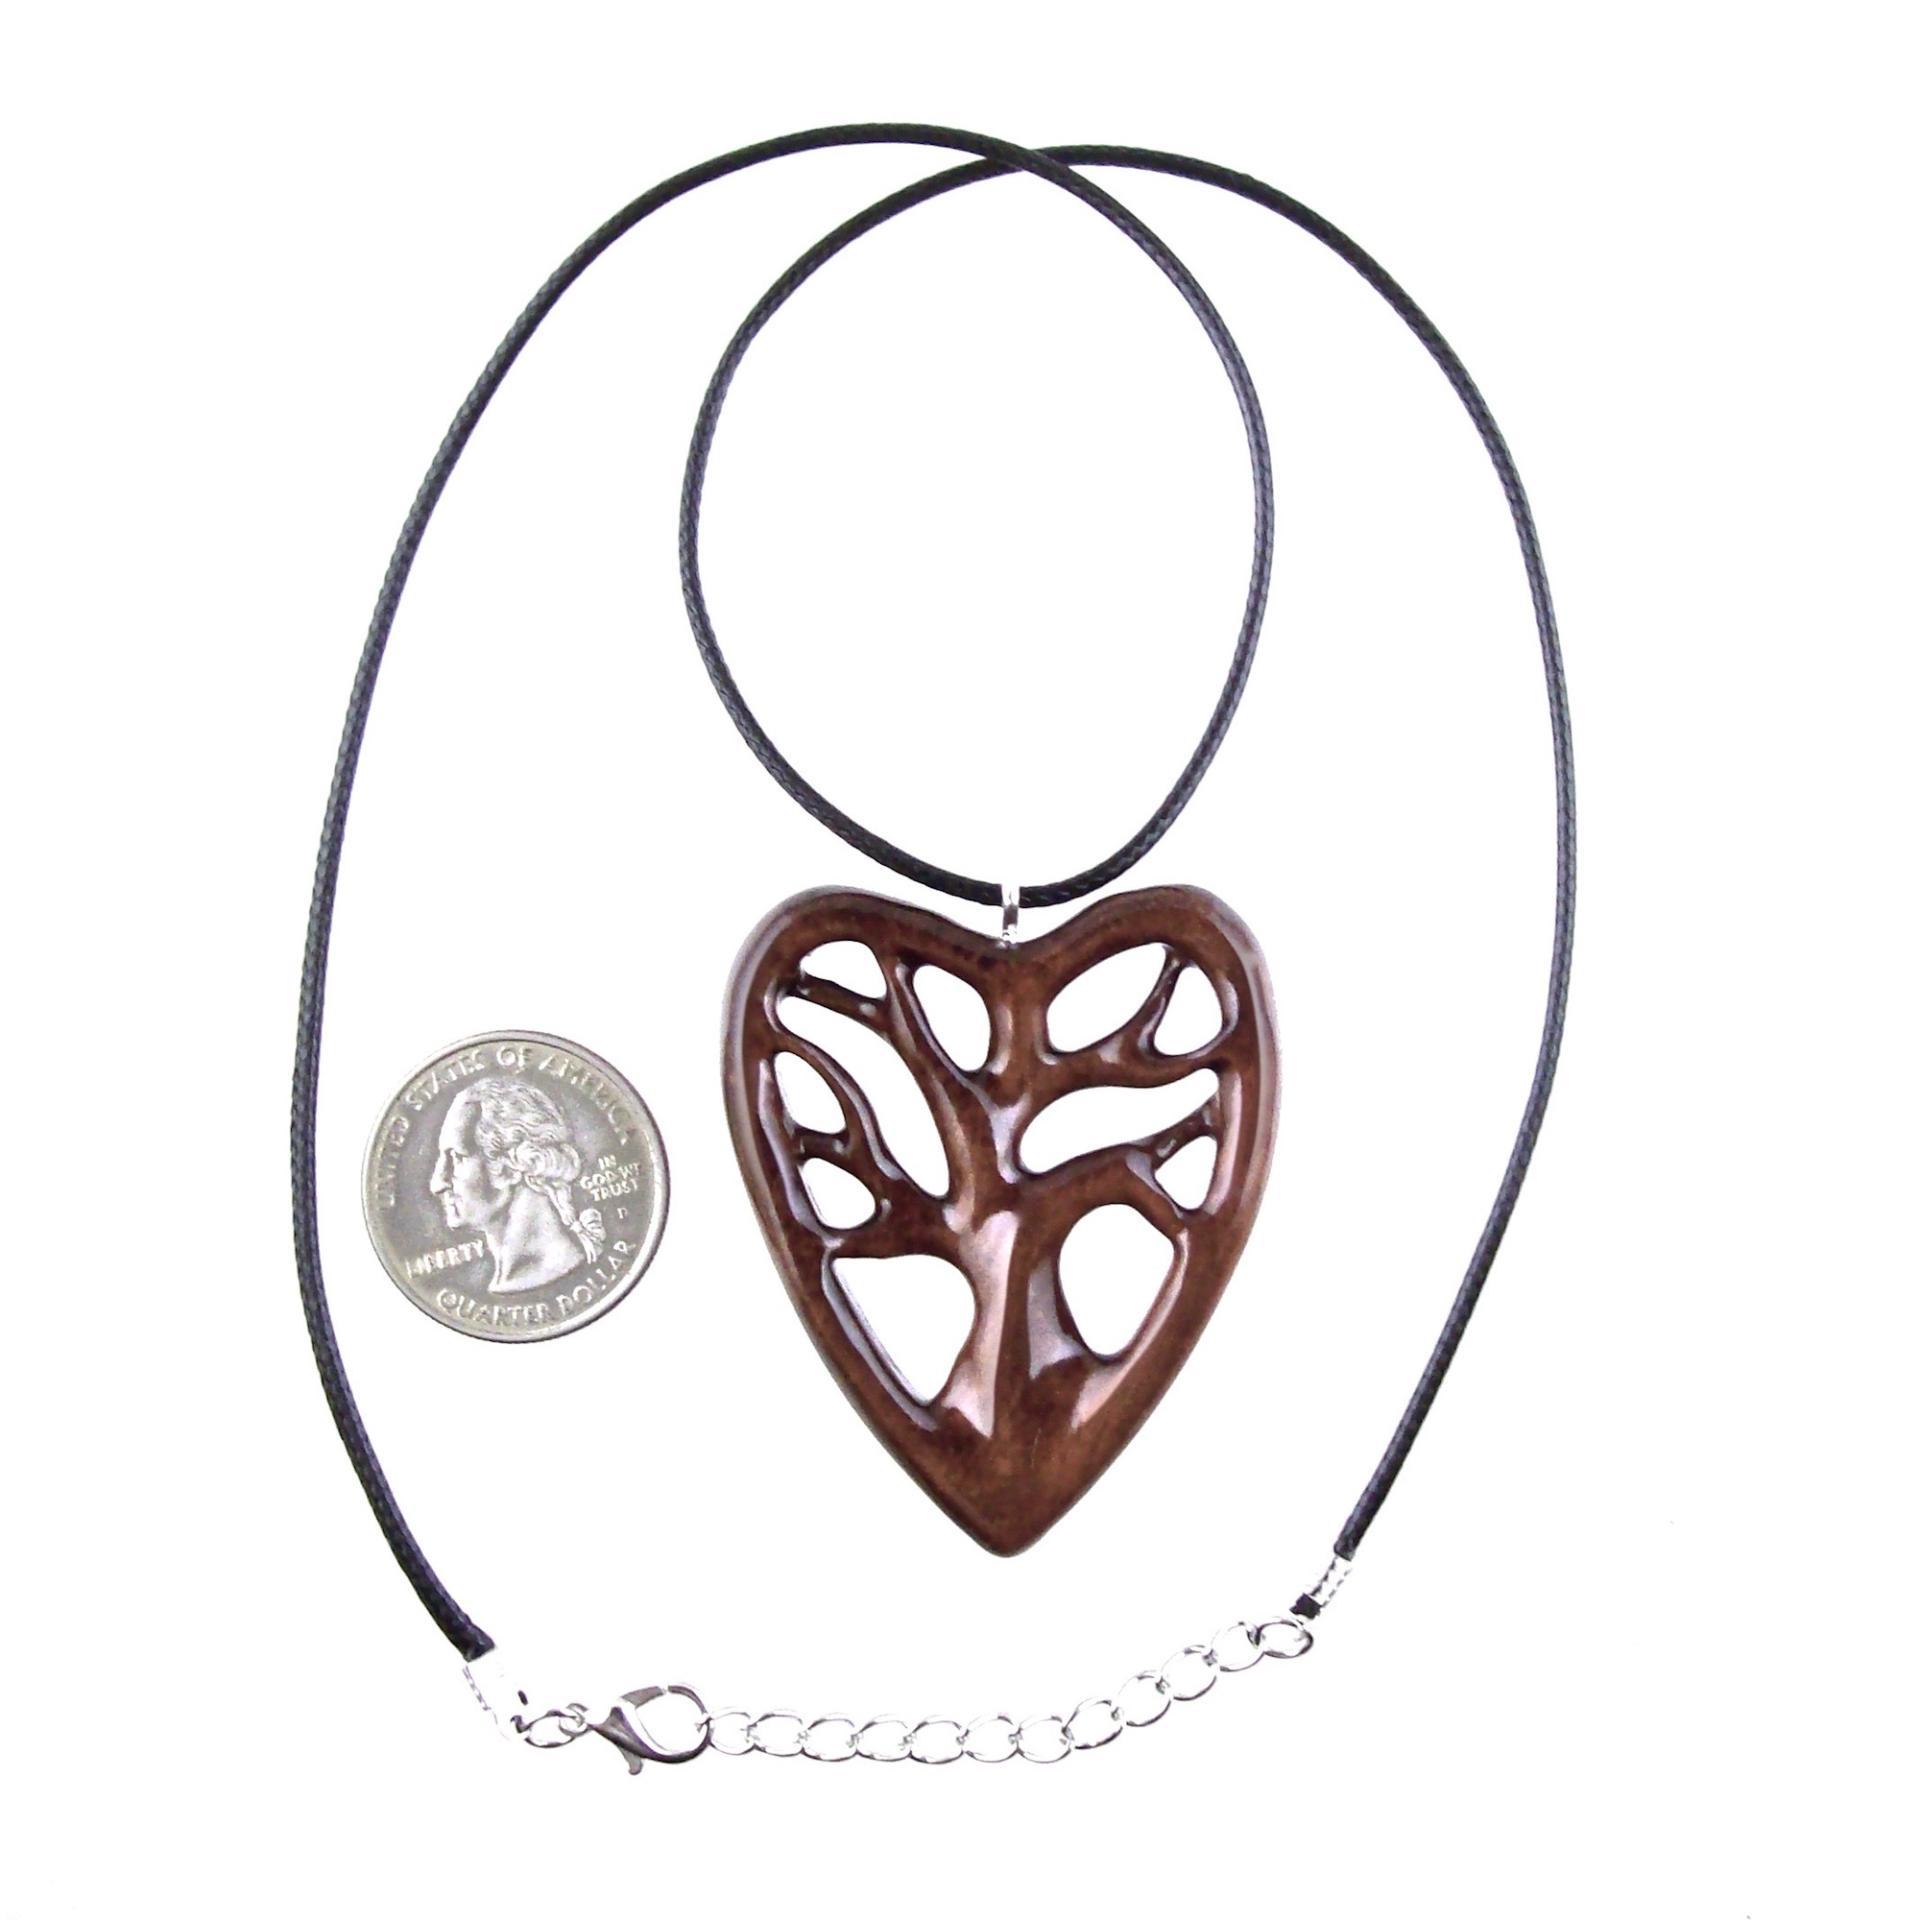 Wooden Heart Pendant, Hand Carved Tree of Life Necklace, Handmade Wood Jewelry, One of a Kind 5th Anniversary Gift for Her